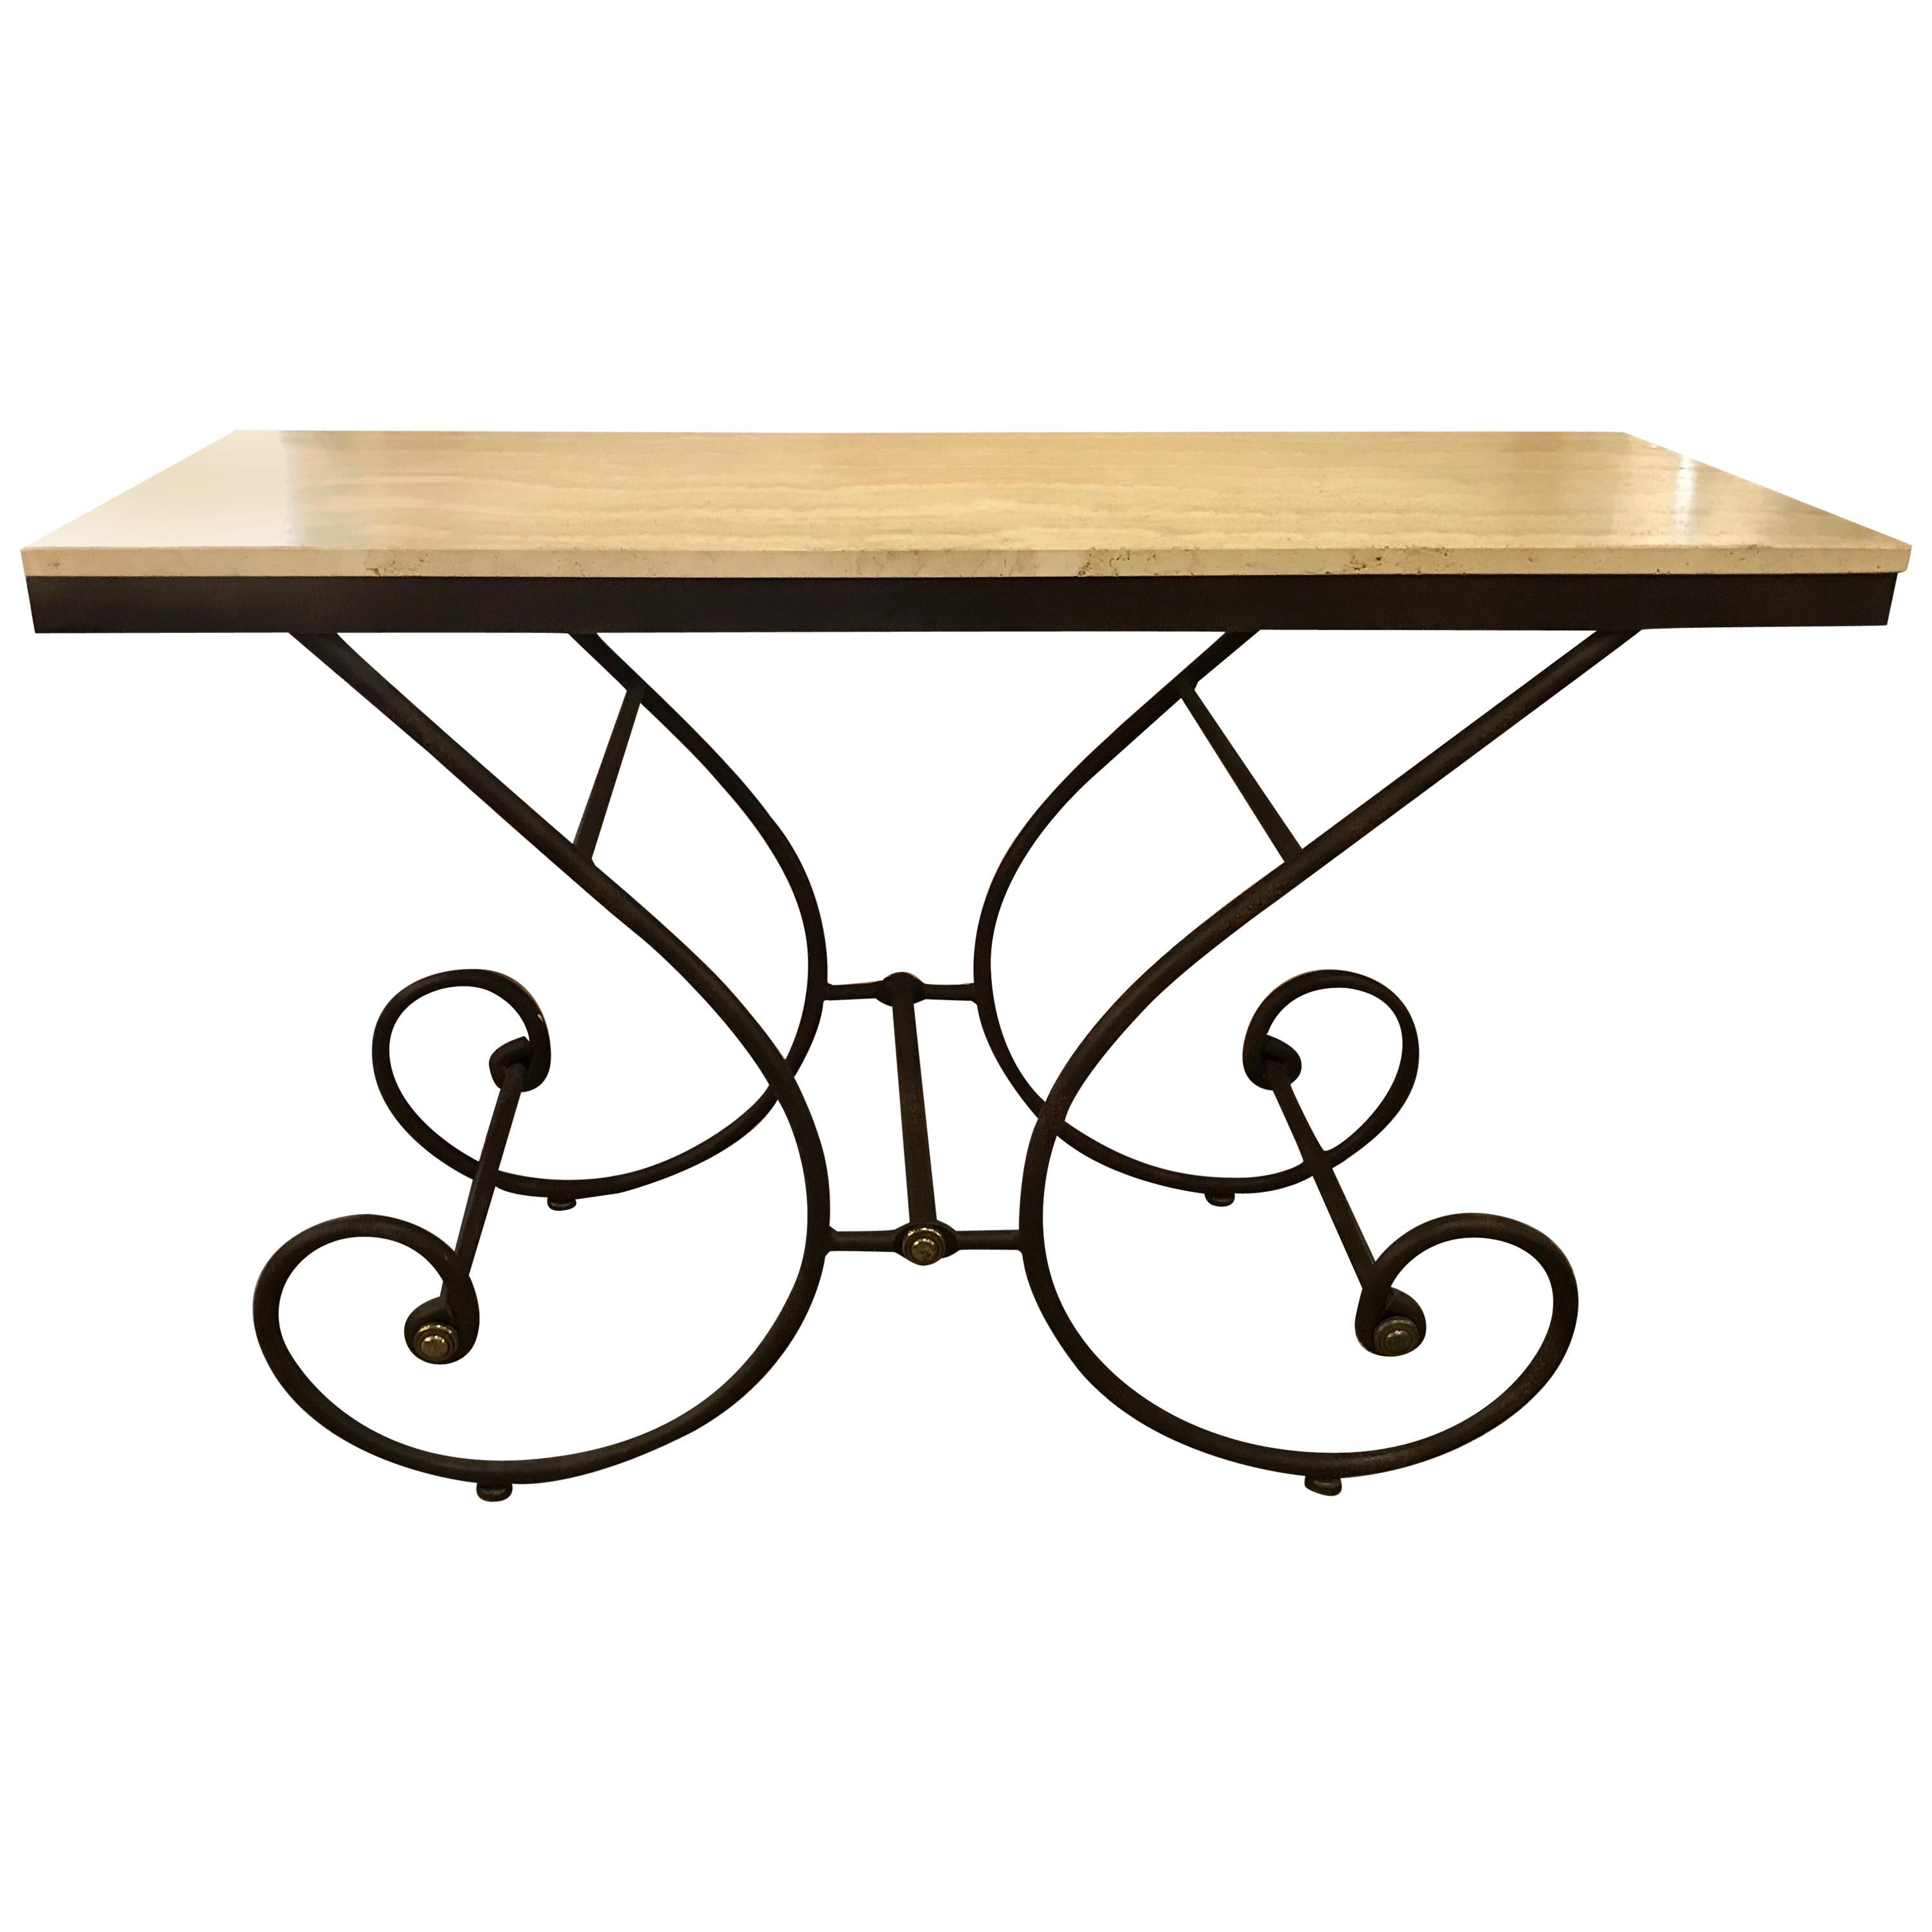 Italian Travertine Stone and Iron Scroll Console Table For Sale